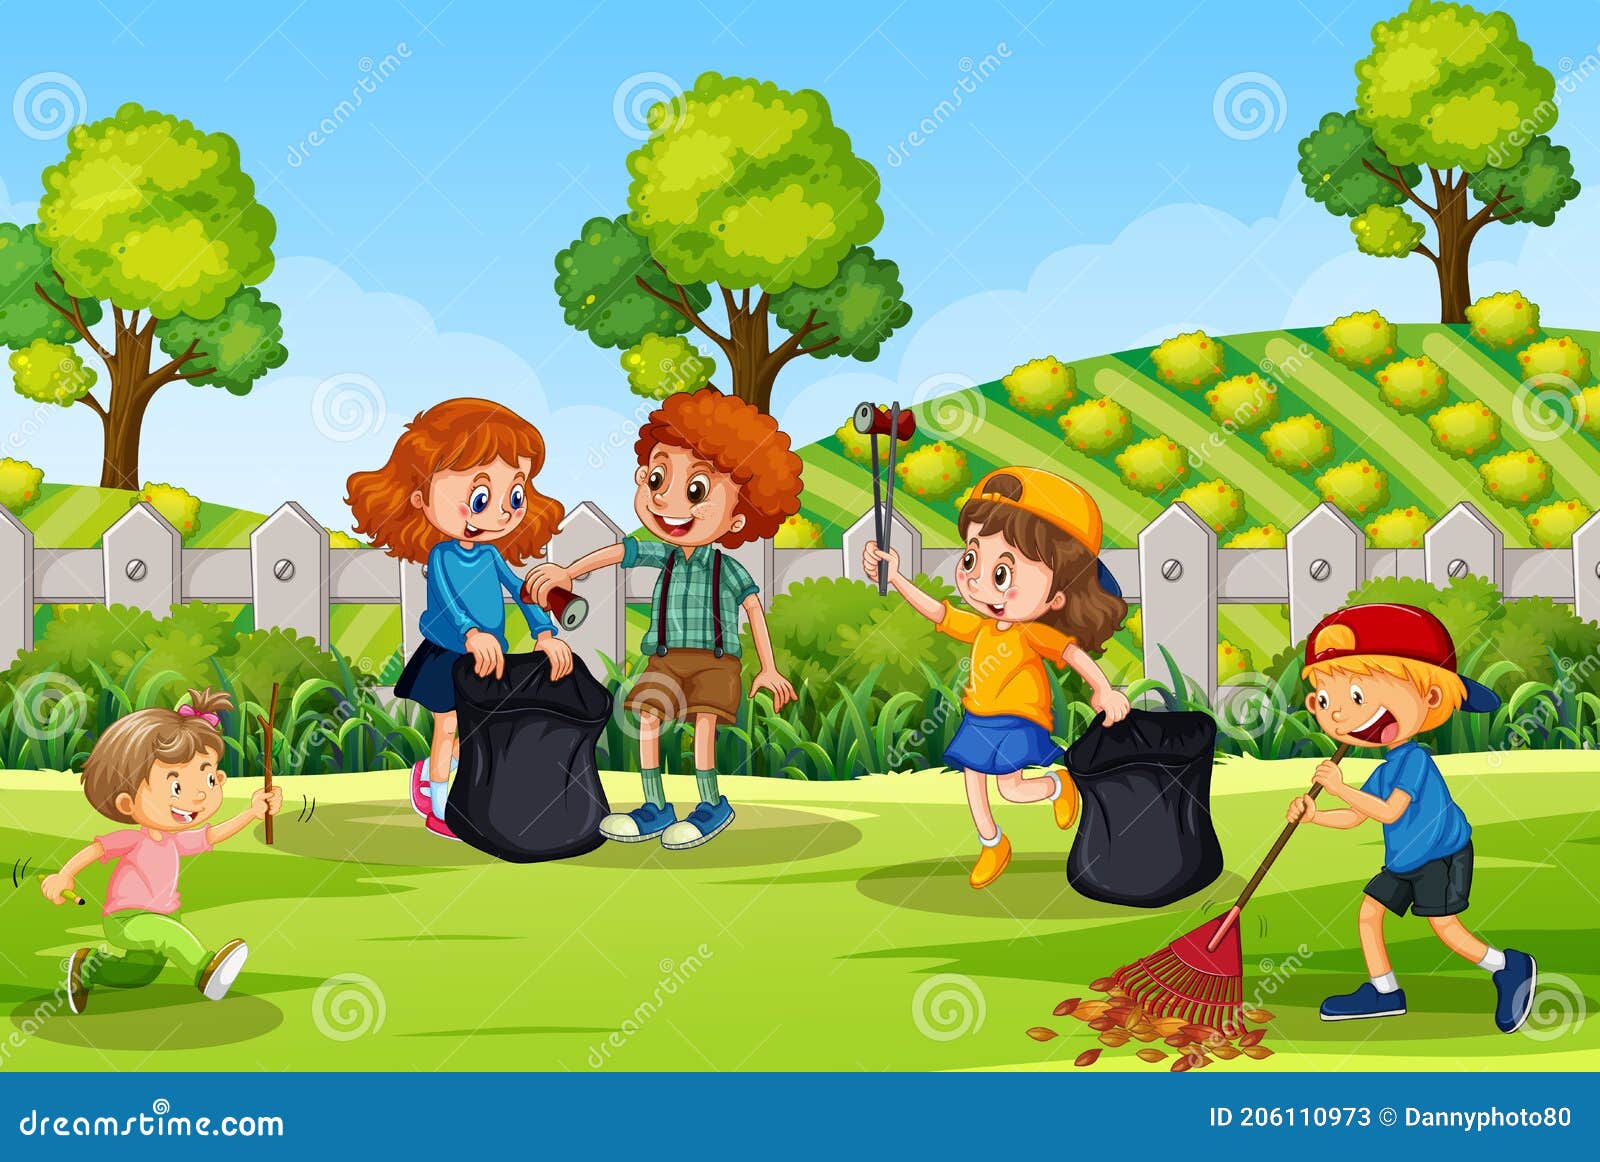 Scene with Many Children Cleaning in the Park Stock Vector ...